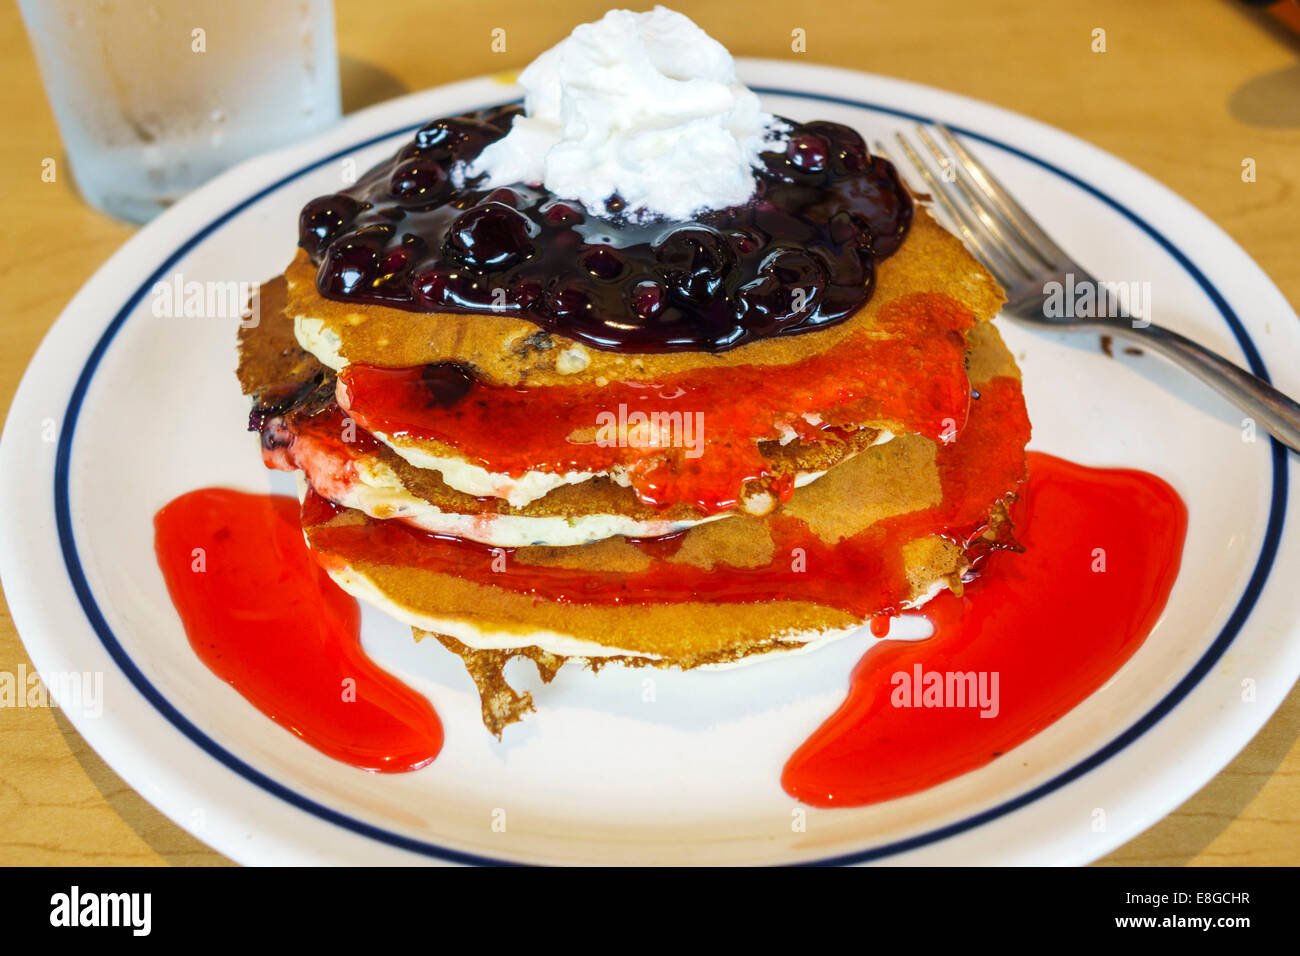 Naples Florida,IHOP,restaurant restaurants food dining eating out cafe cafes bistro,interior inside,plate,dish,pancakes,stack,syrup,blueberry,visitors Stock Photo